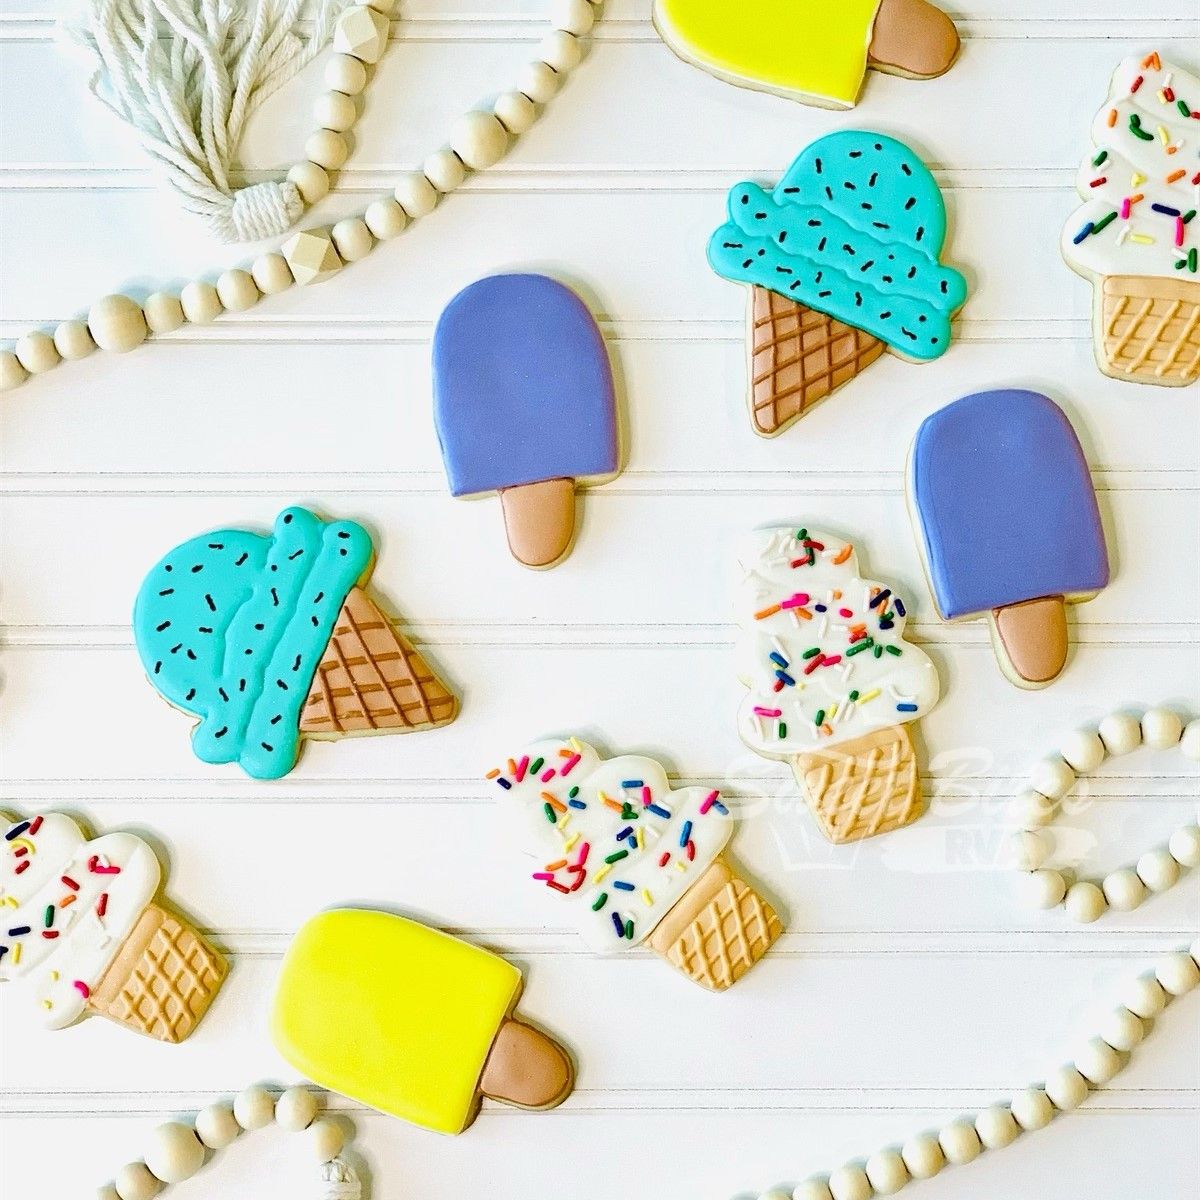 DIY Cookie Class - Summer Treats (Ages 10 & Up)